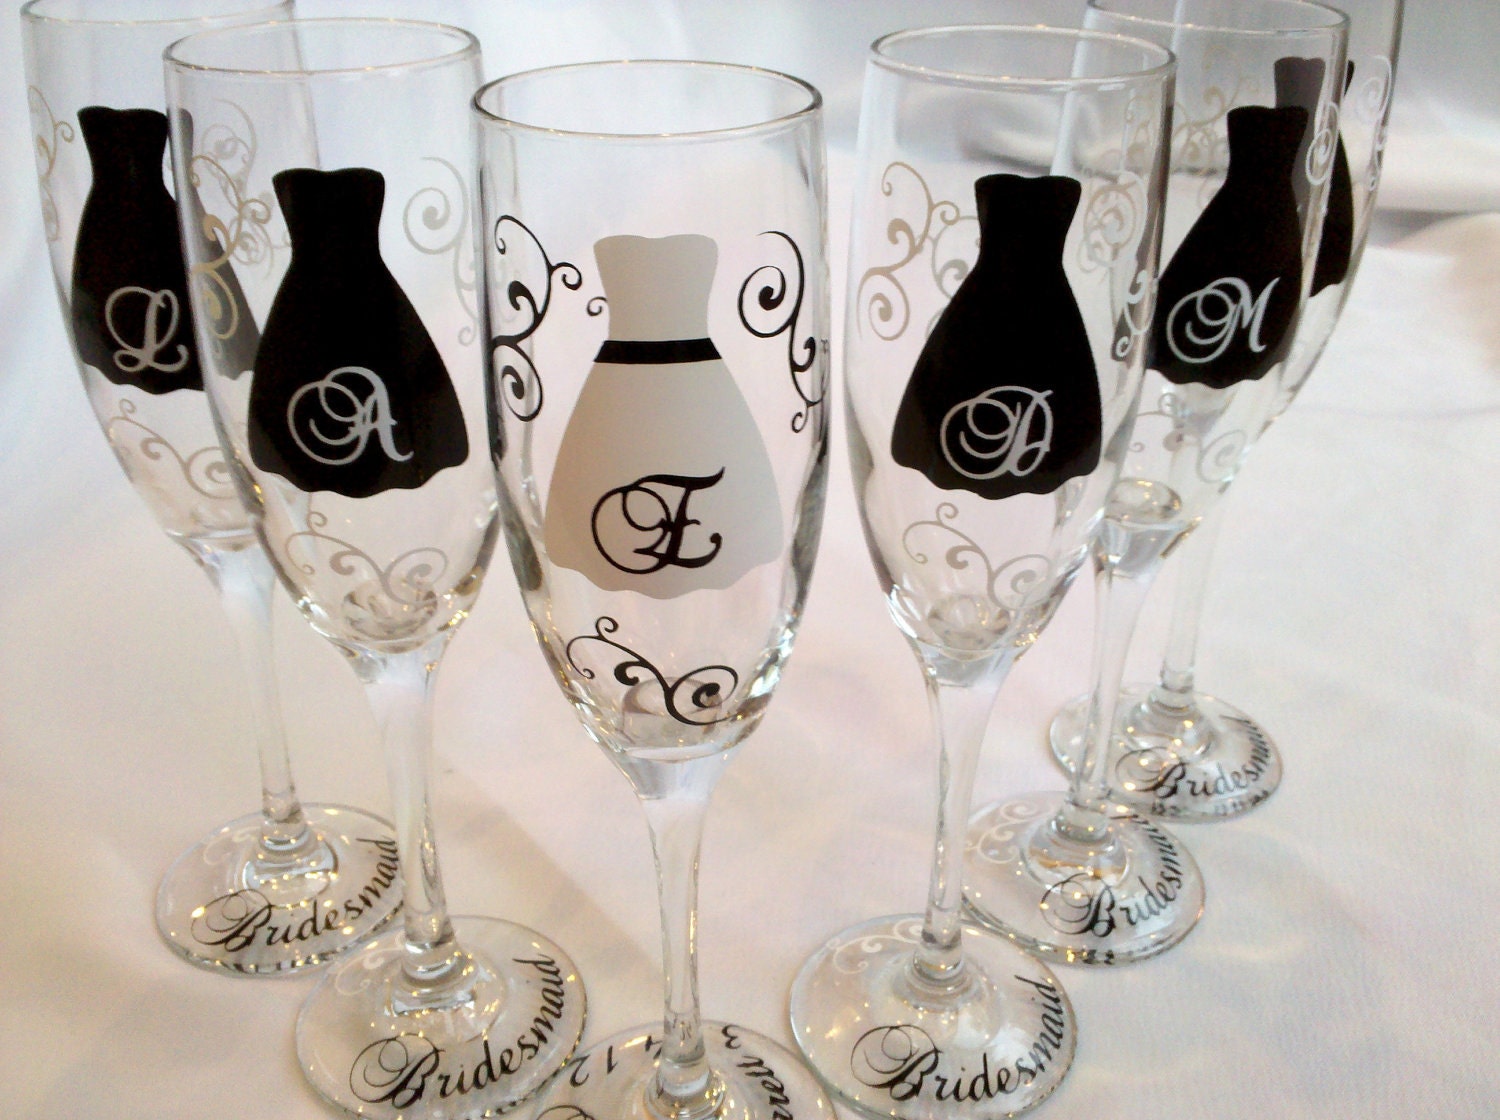 4 Bridesmaids champagne flutes, Personalized wedding glasses in black and white wedding colors, great gift idea